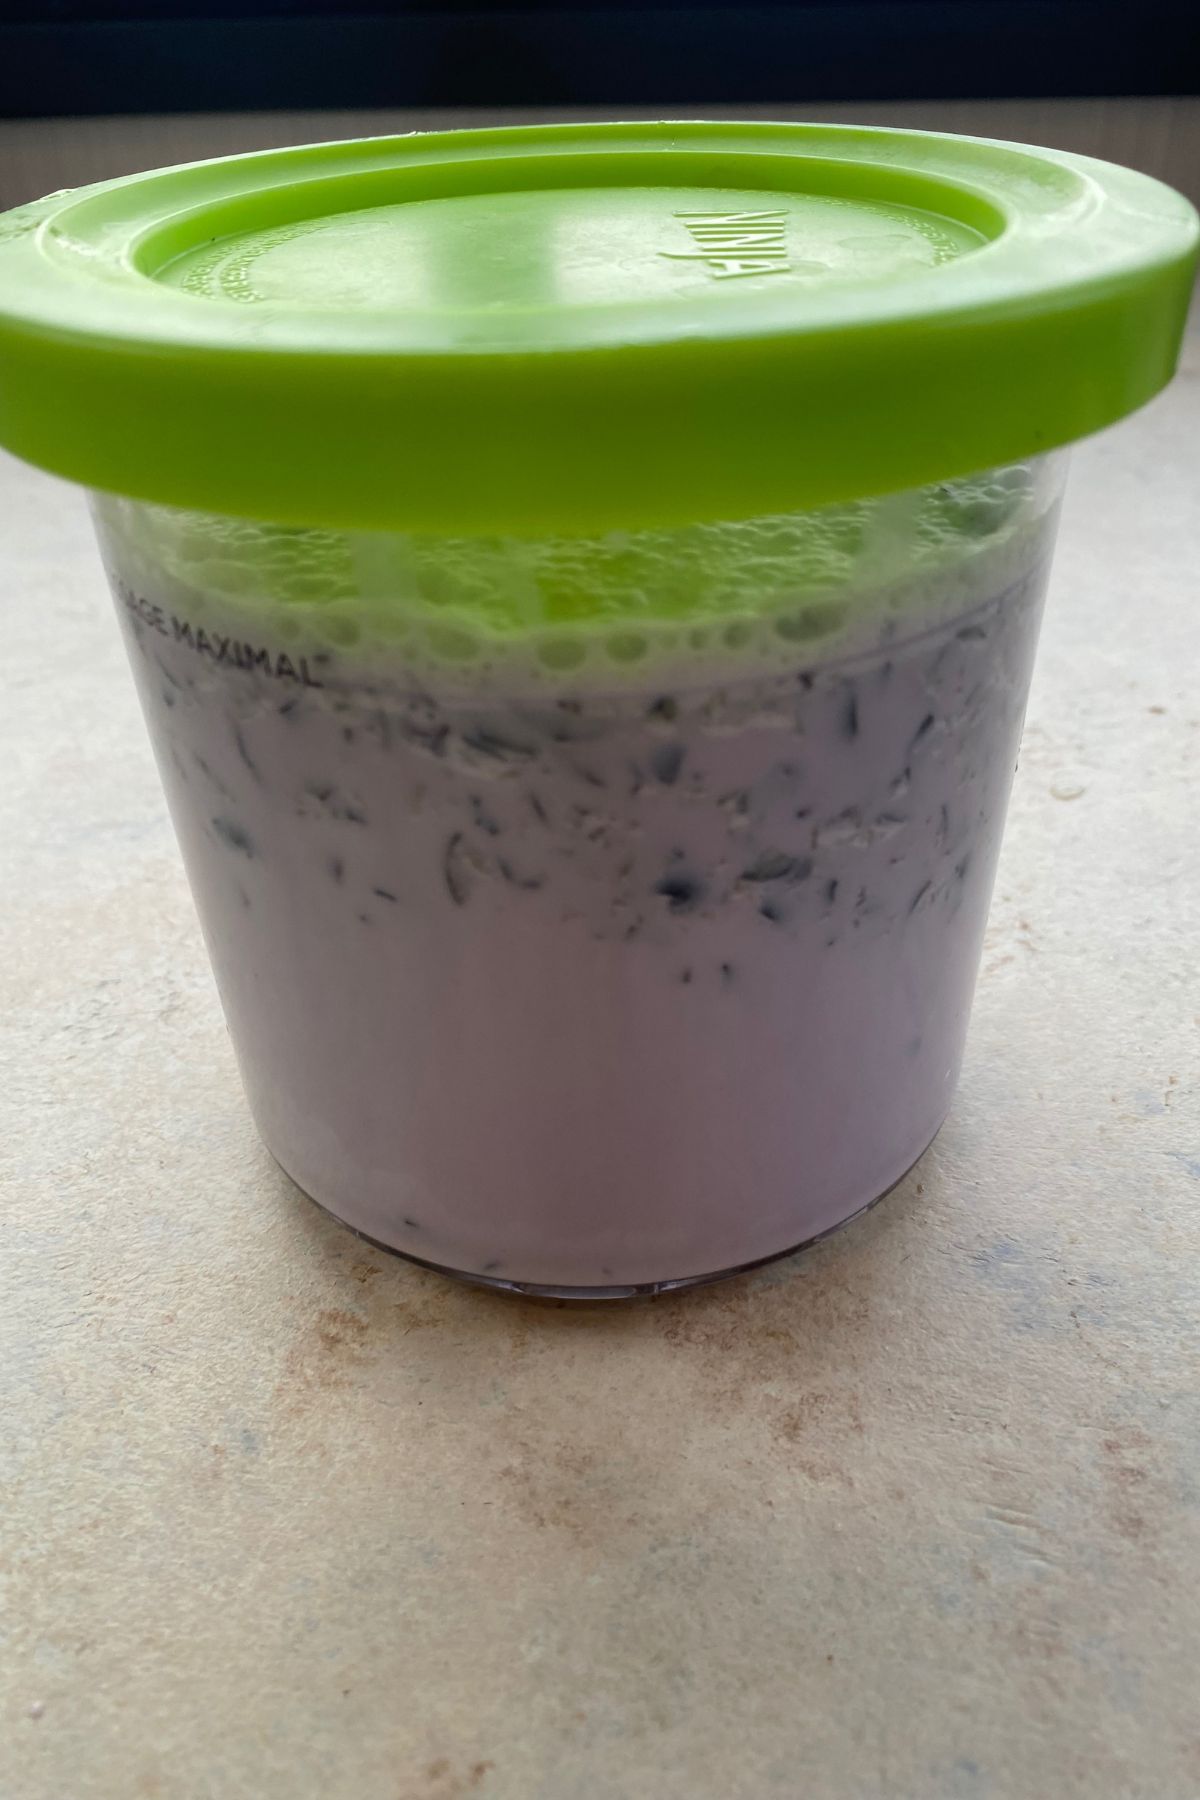 A container of blueberry yogurt with a green lid sitting on a counter.